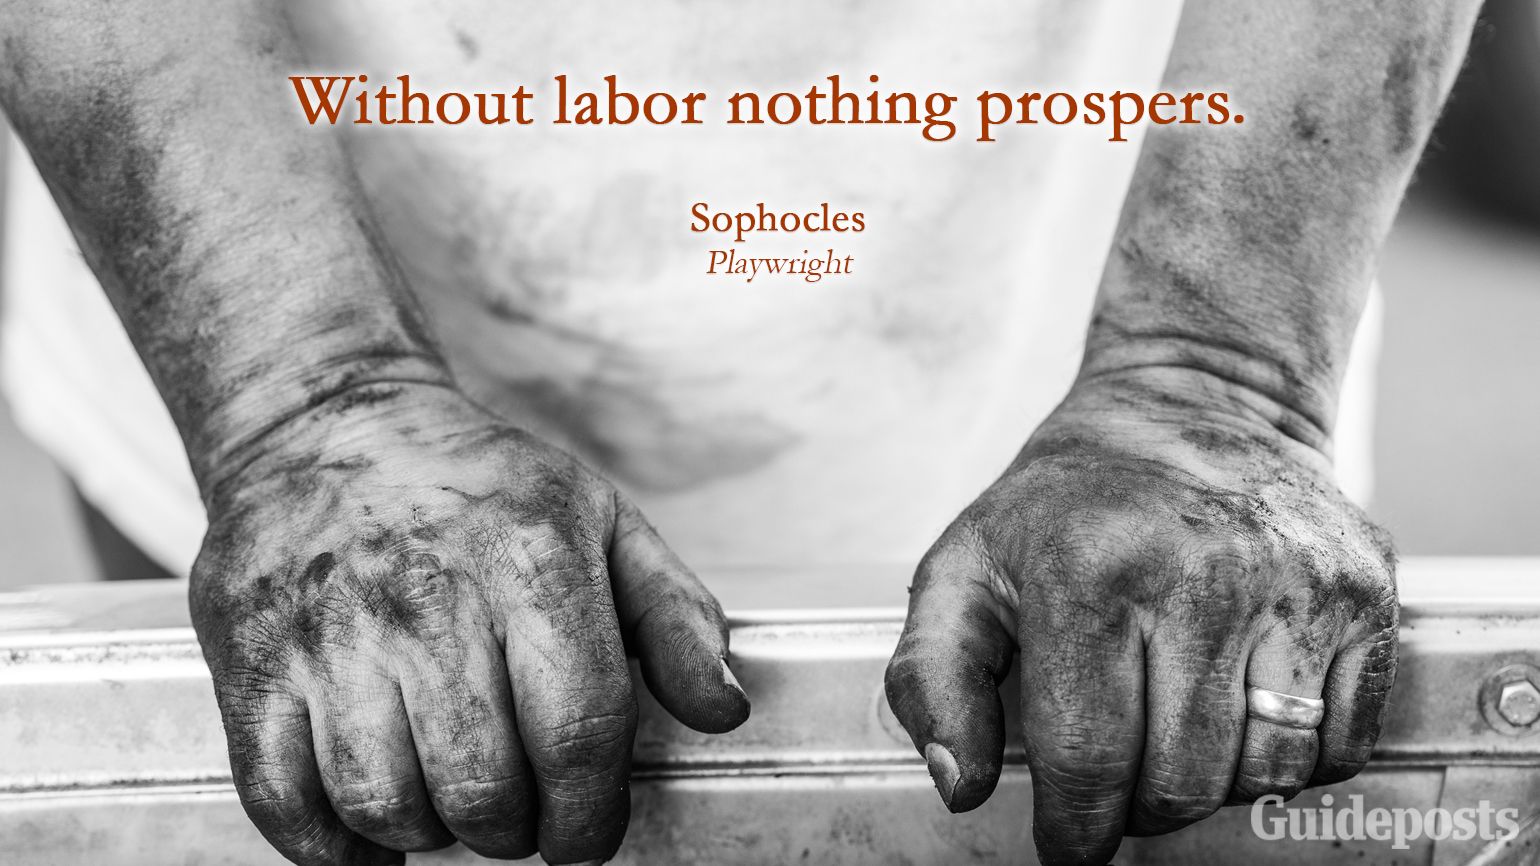 Inspiring Labor Day Quotes: Without labor nothing prospers. Sophocles better living life advice